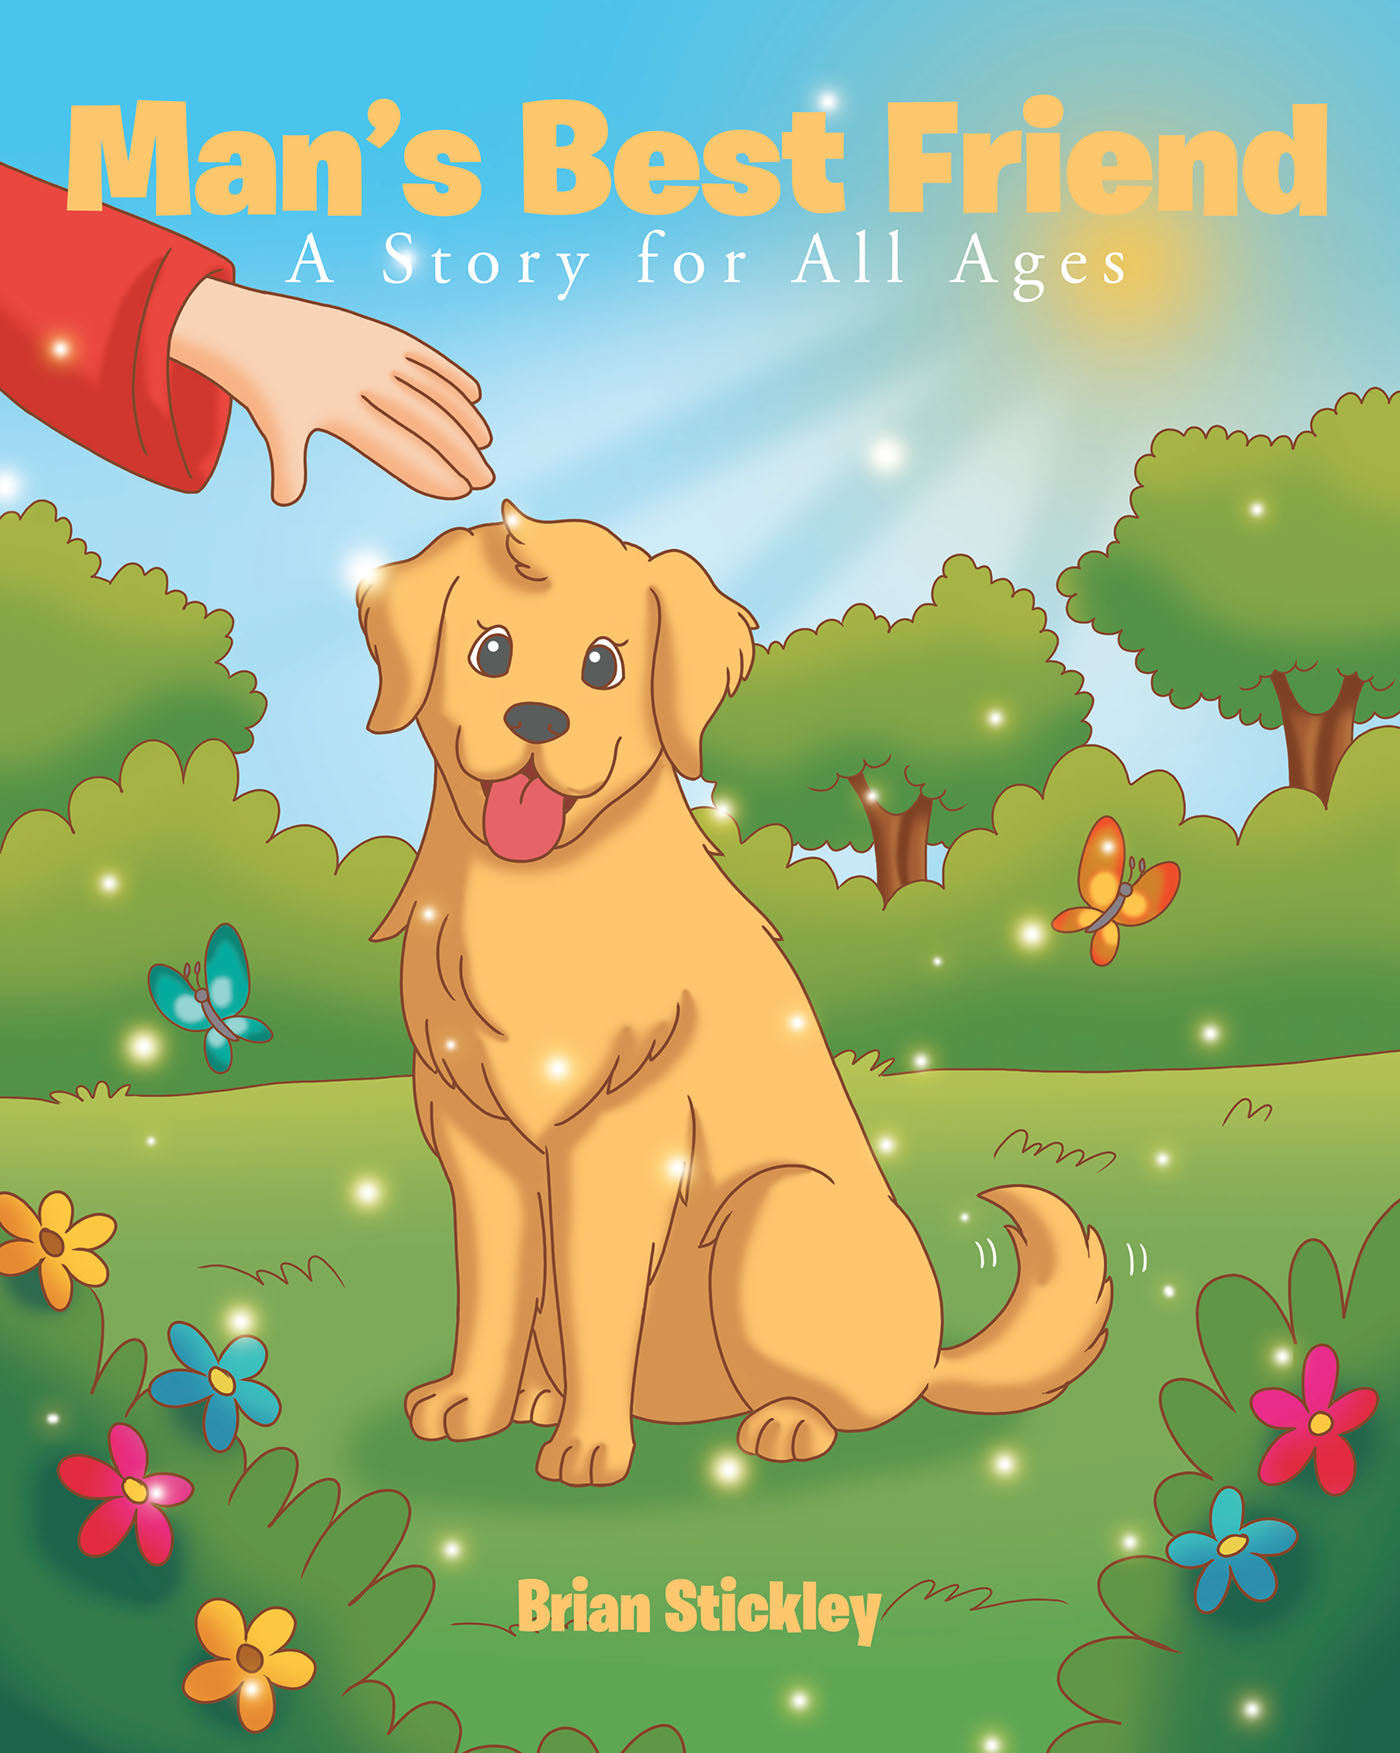 Brian Stickley’s Newly Released "Man’s Best Friend: A Story for All Ages" is a Sweet Tale of How Dogs Learned to be Man’s Best Friend